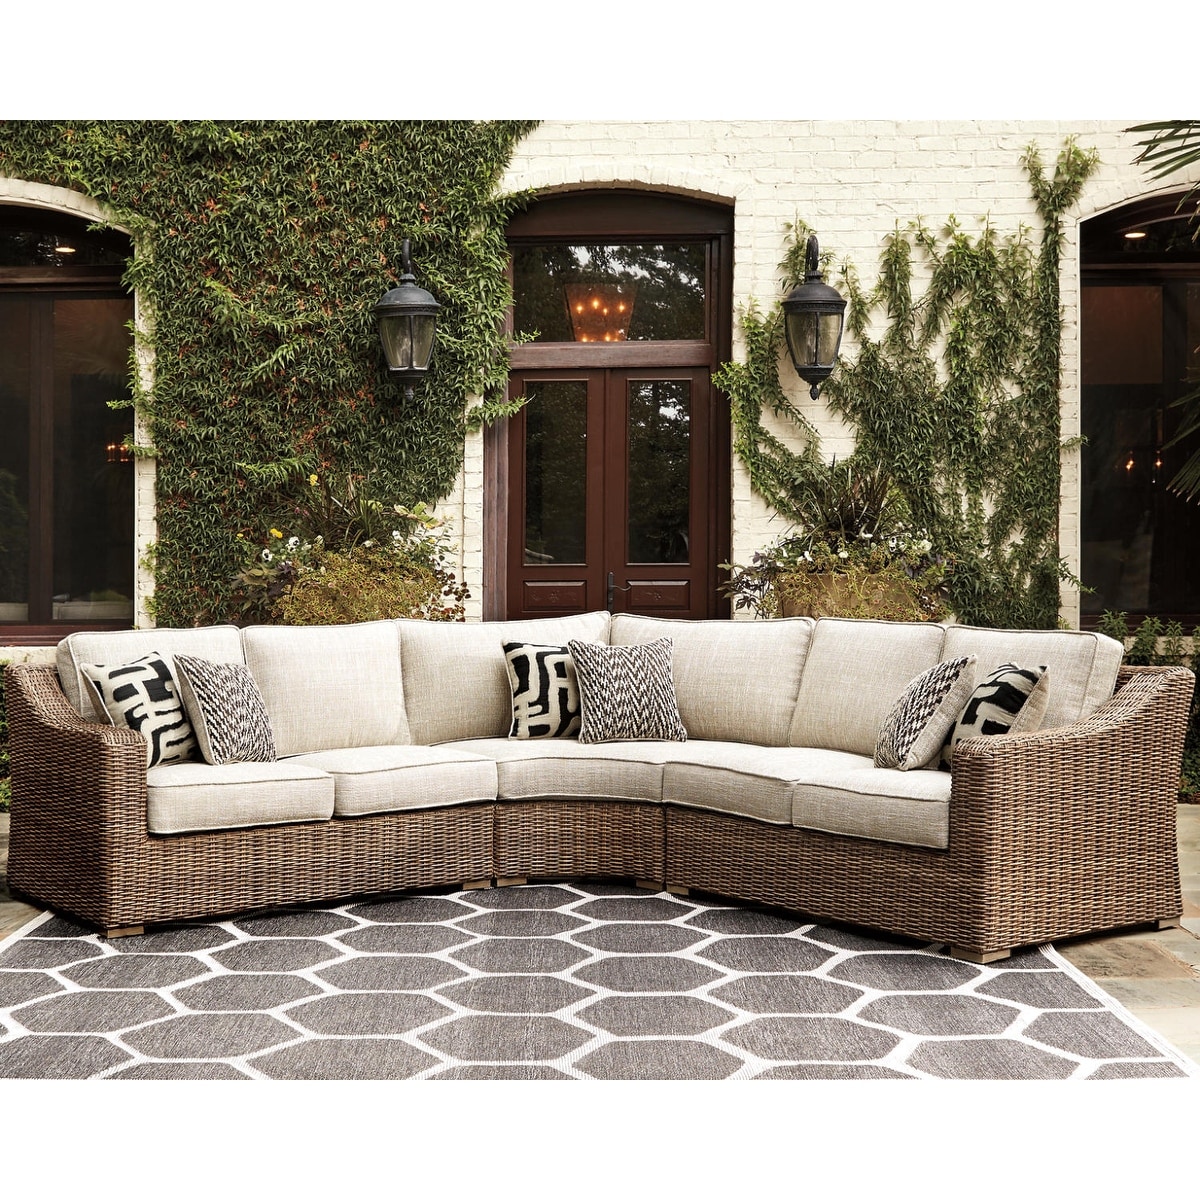 & by Outdoor Bath Sale - Design - Beyond 26396066 On Ashley Beige Bed - Signature Beachcroft Sectional